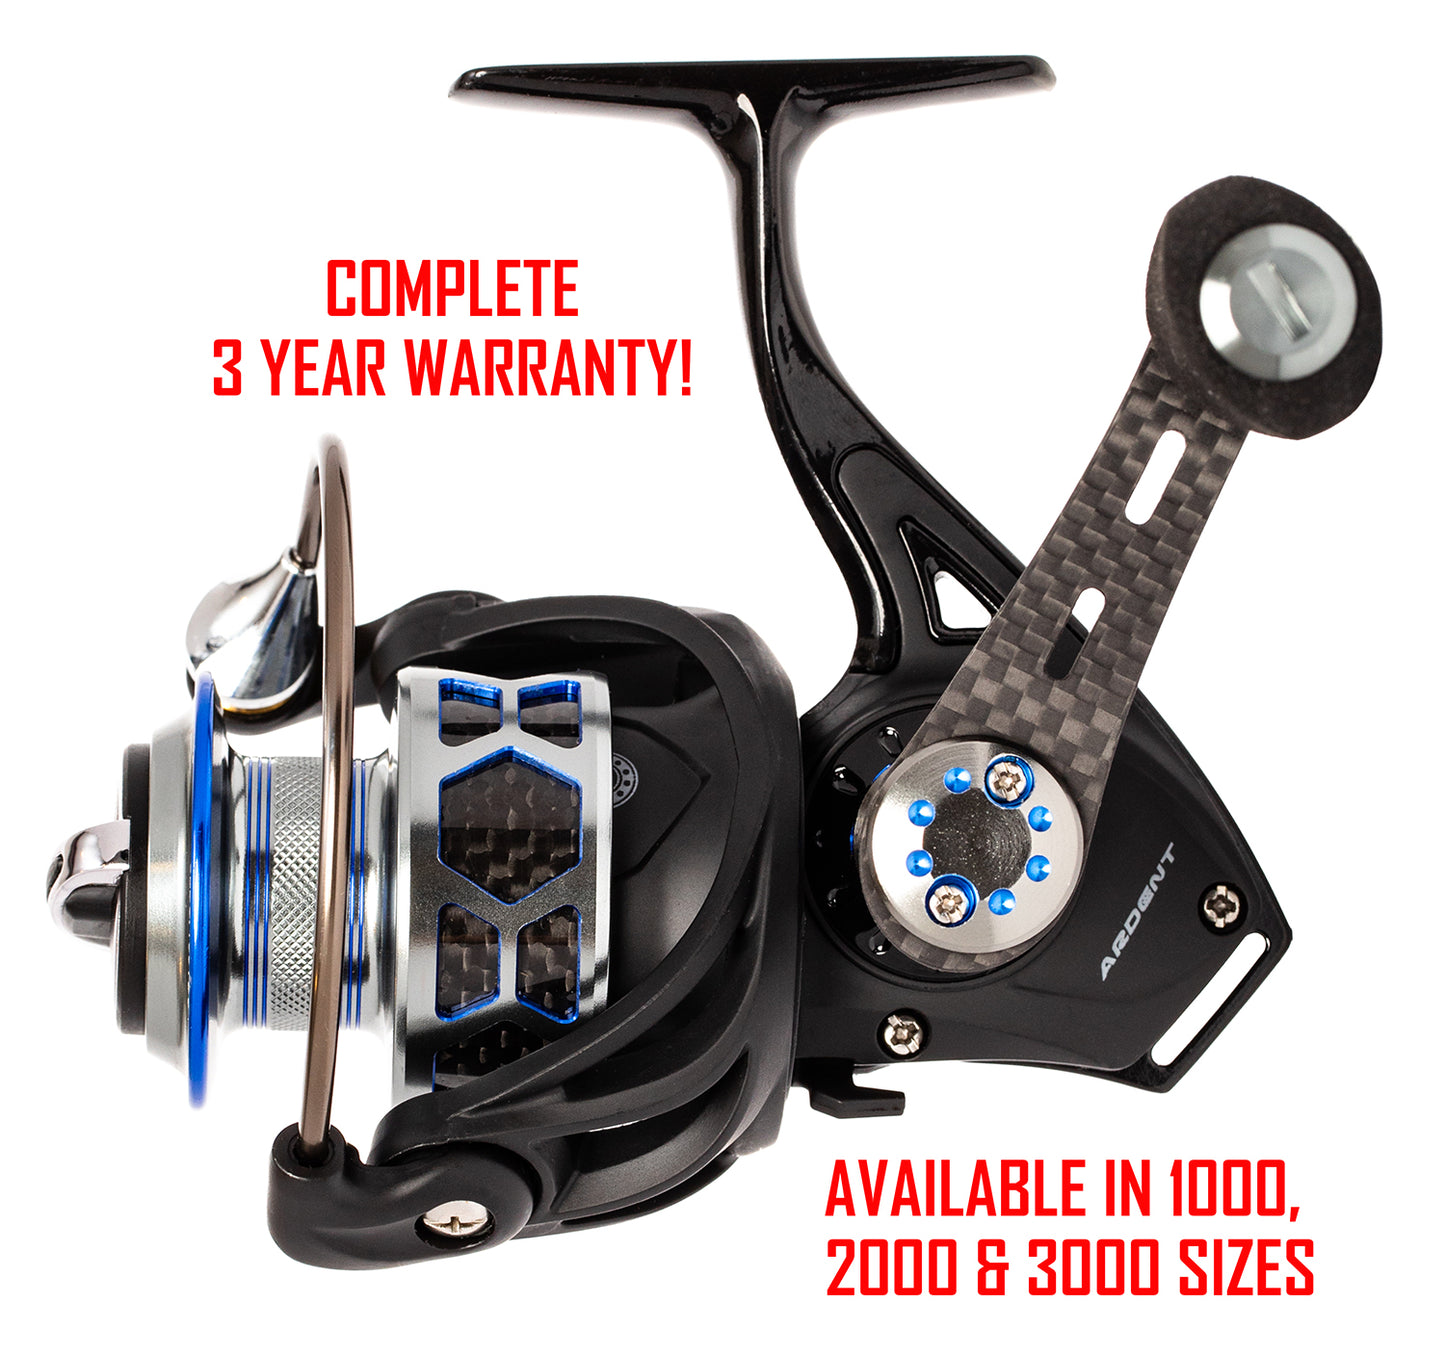 Black and blue BOLT SPINNING REEL. RED text: COMPLETE 3 YEAR WARRANTY! AVAILABLE IN 1000. 2000 and 3000 SIZES